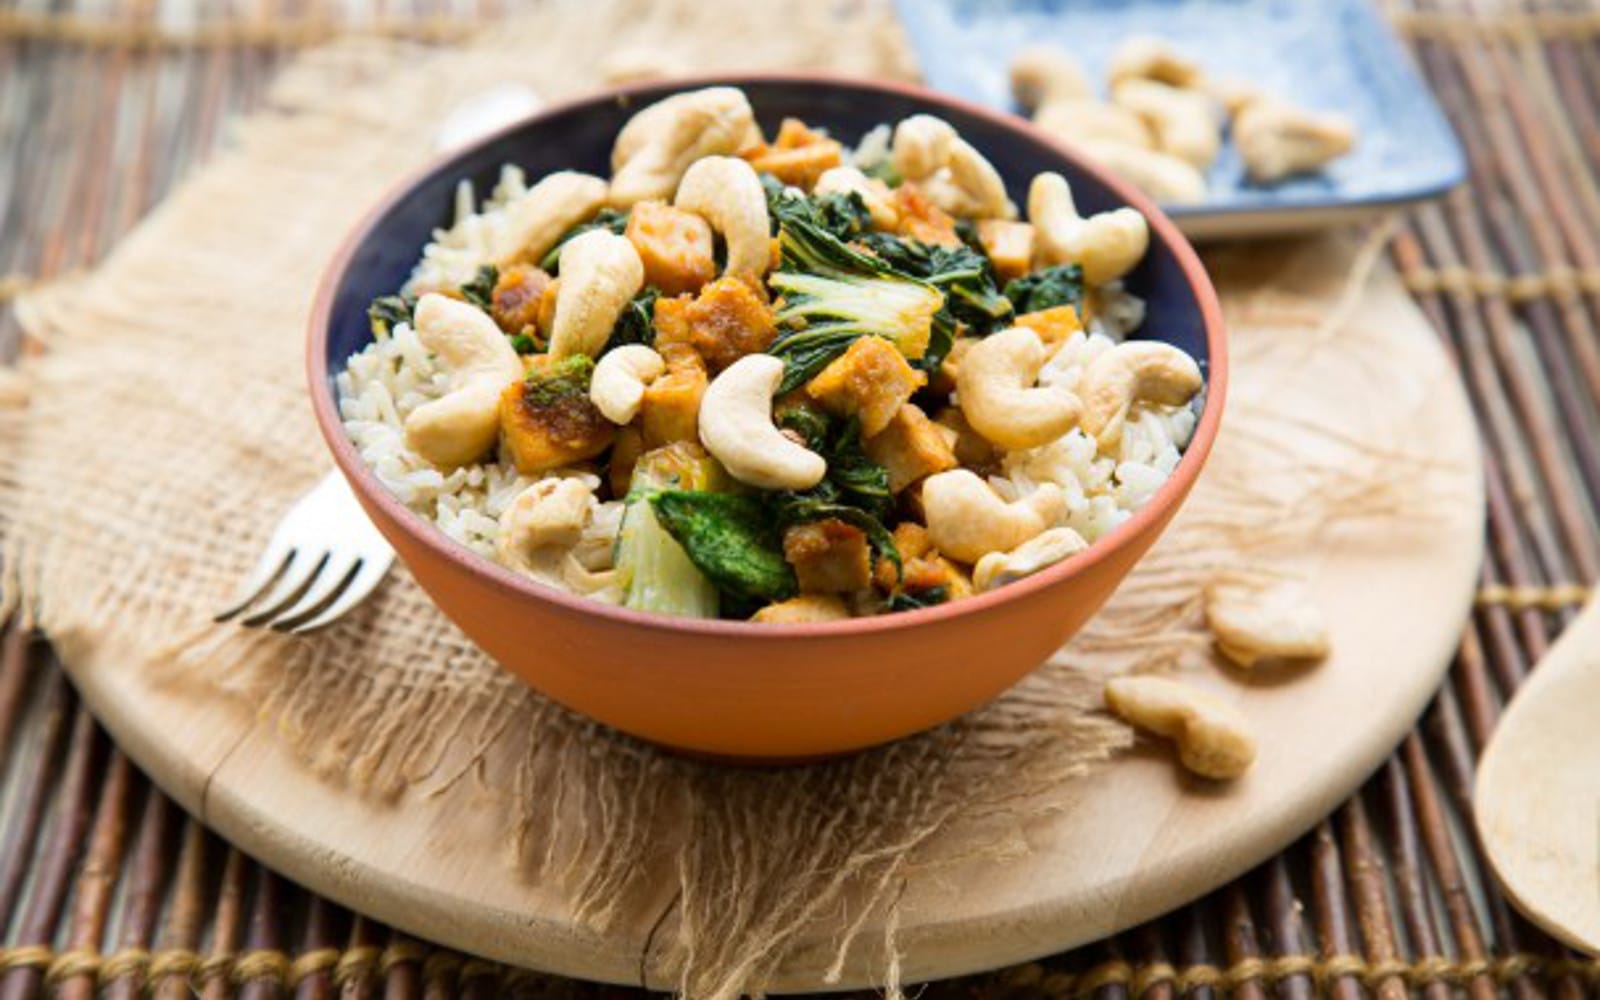 Ginger Citrus Tofu Power Bowl With Bok Choy and Cashews